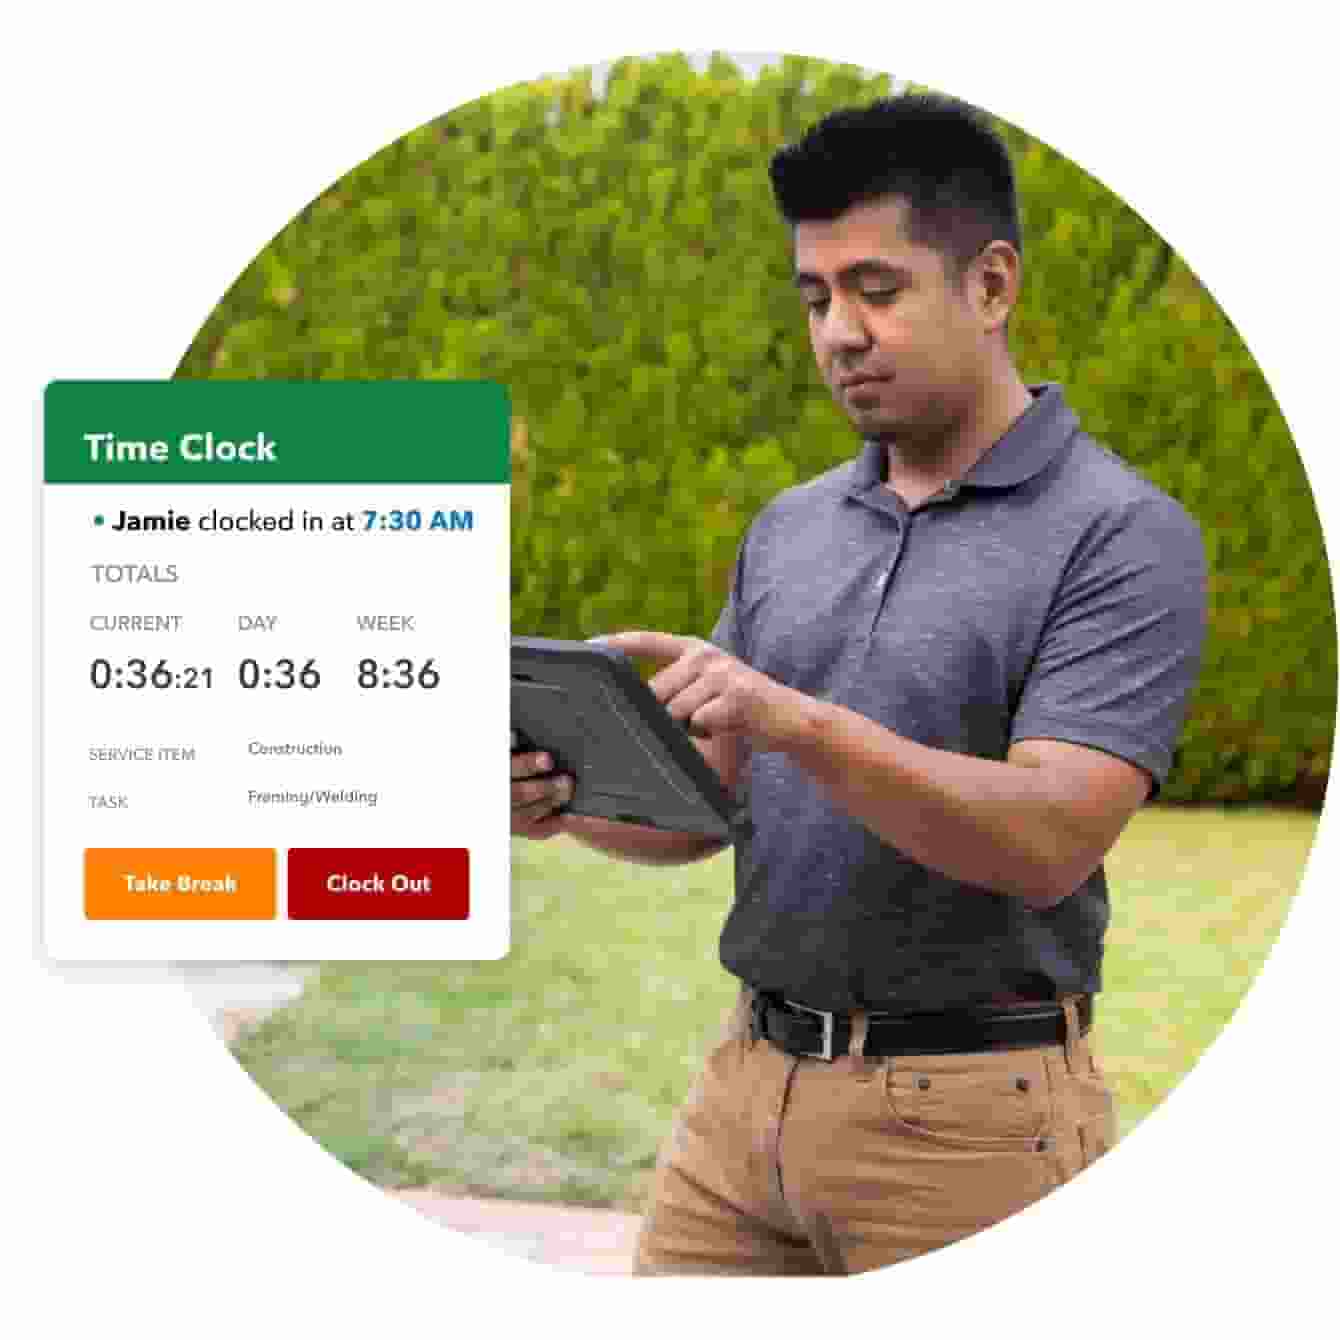 Photo of a person working outside on their tablet device. Overlayed on top the photo is an illustration of a time clock widget with buttons that read: take a break and clock out.